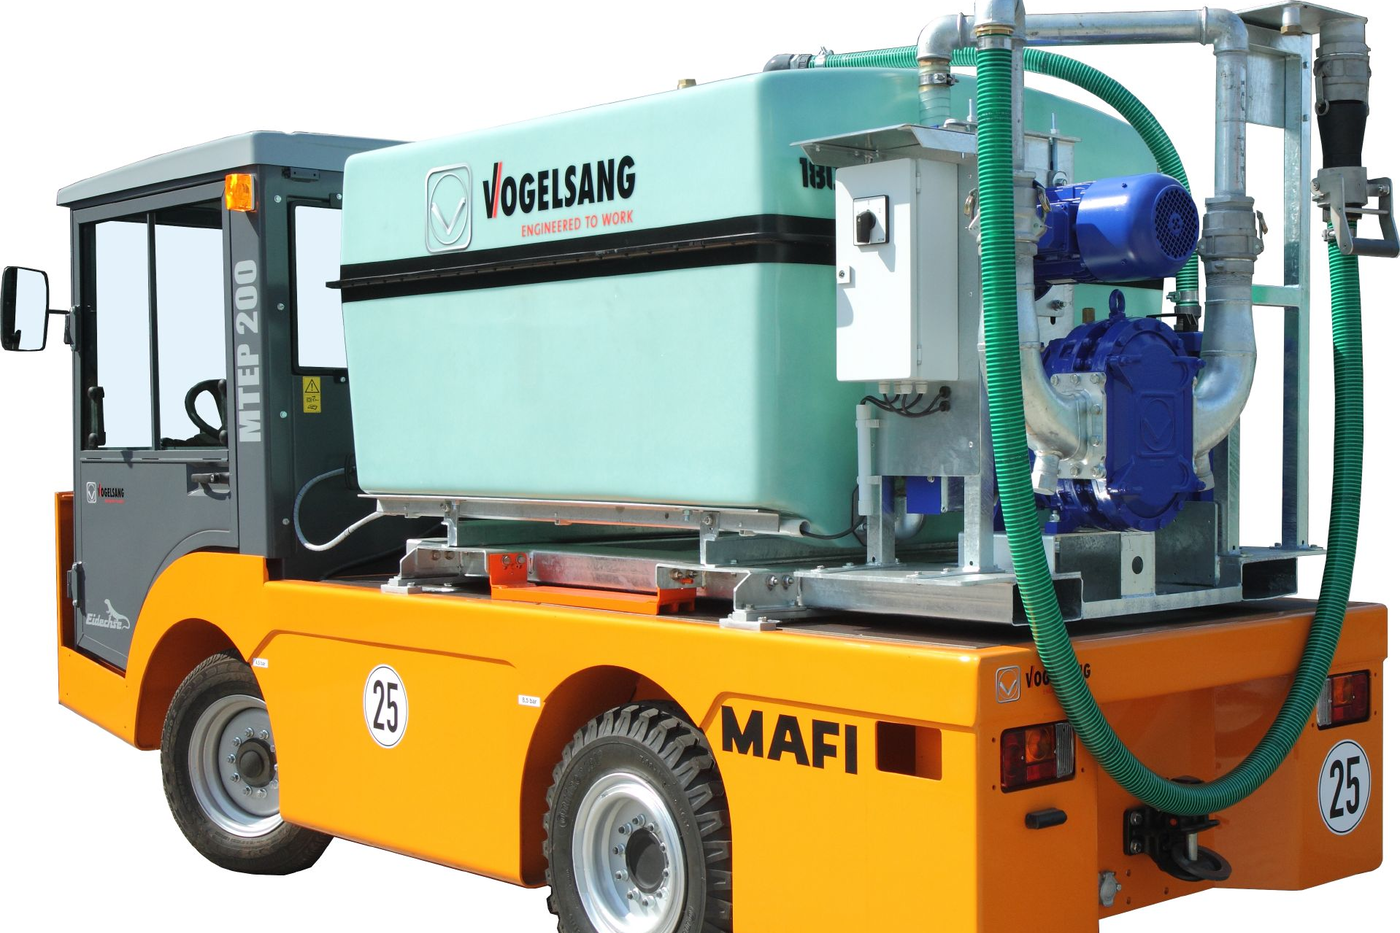 MobileUnit M50, the mobile wastewater disposal system